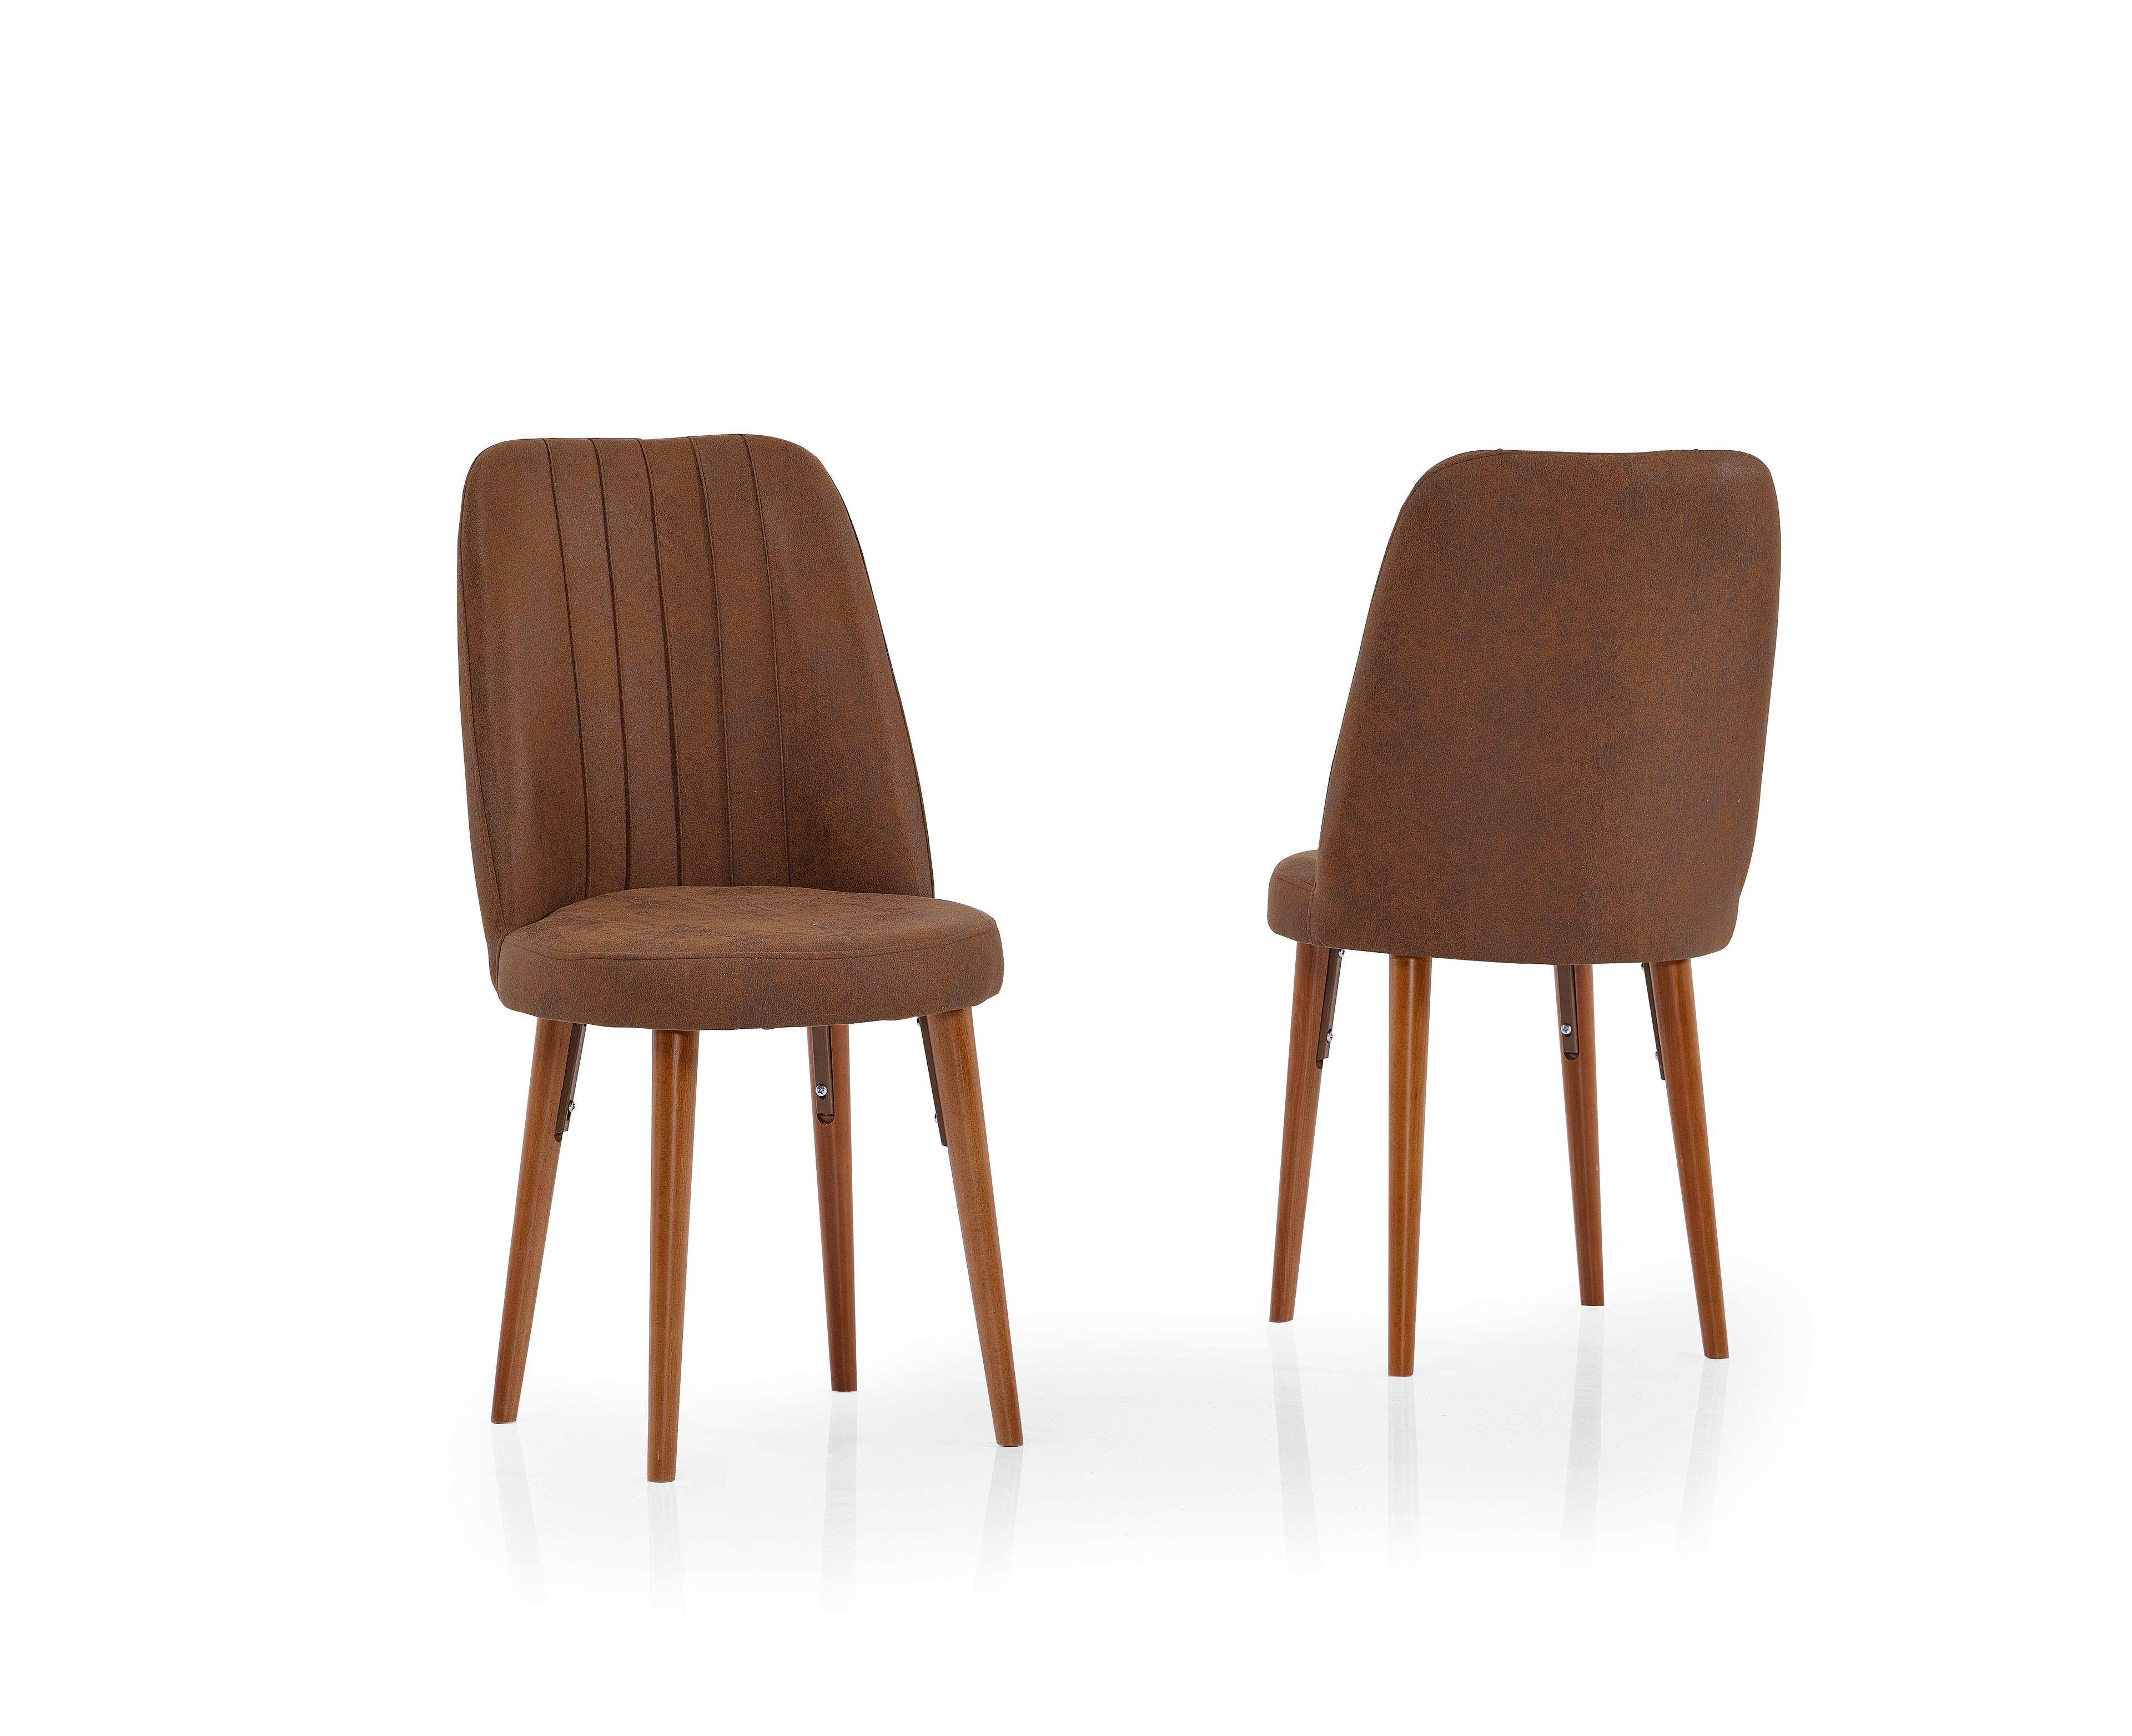 Olesivo Oval Gold Chair - Brown